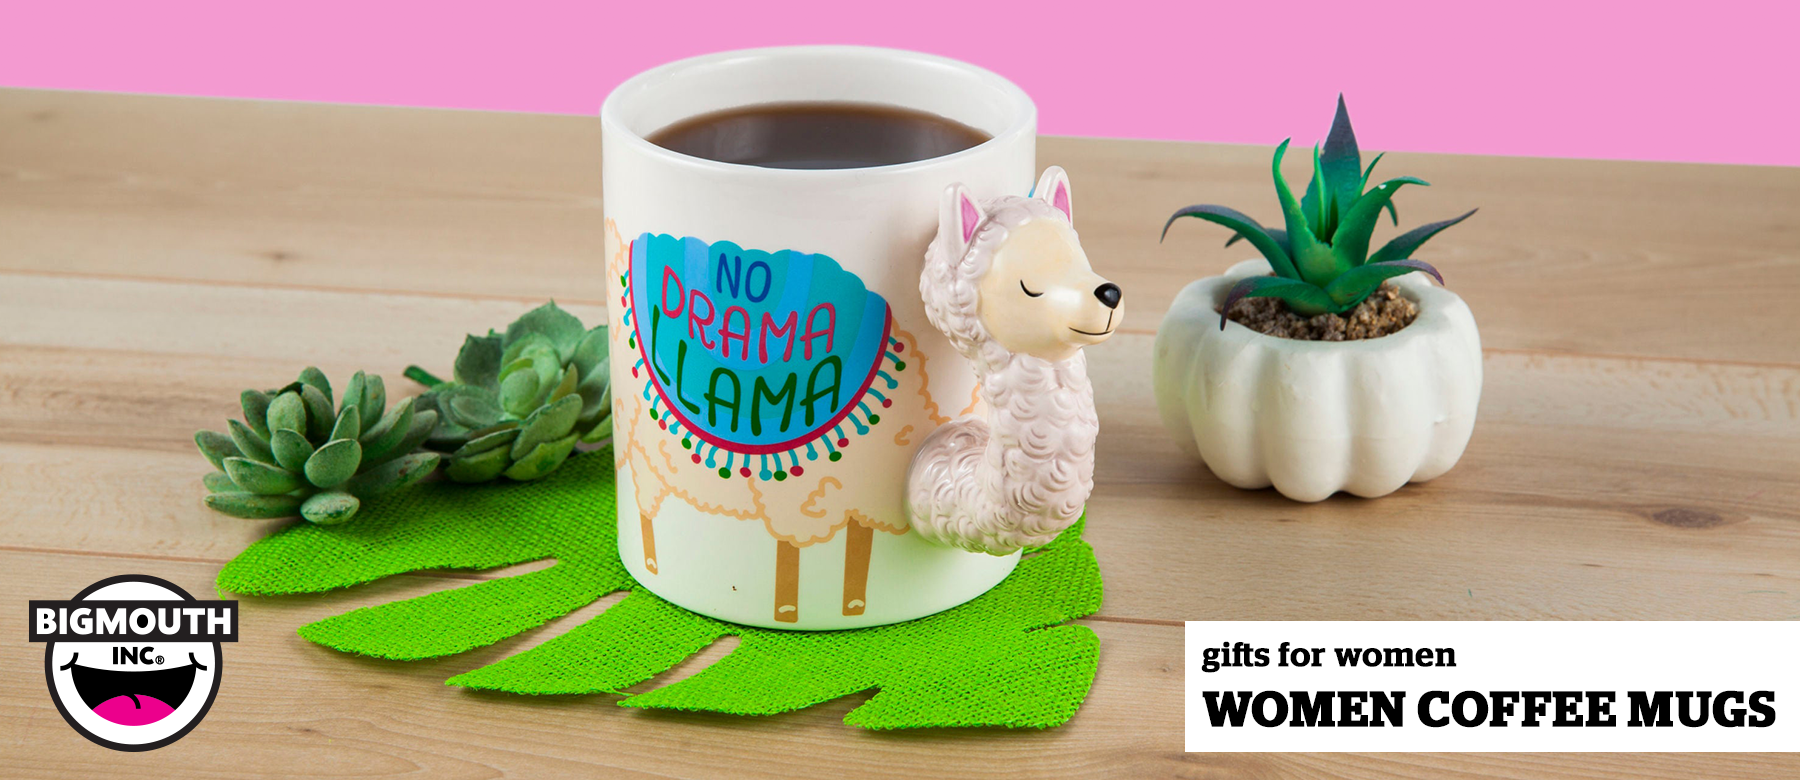 This Sloth Shaped Coffee Mug Is The Cutest Way To Drink Your Morning Joe